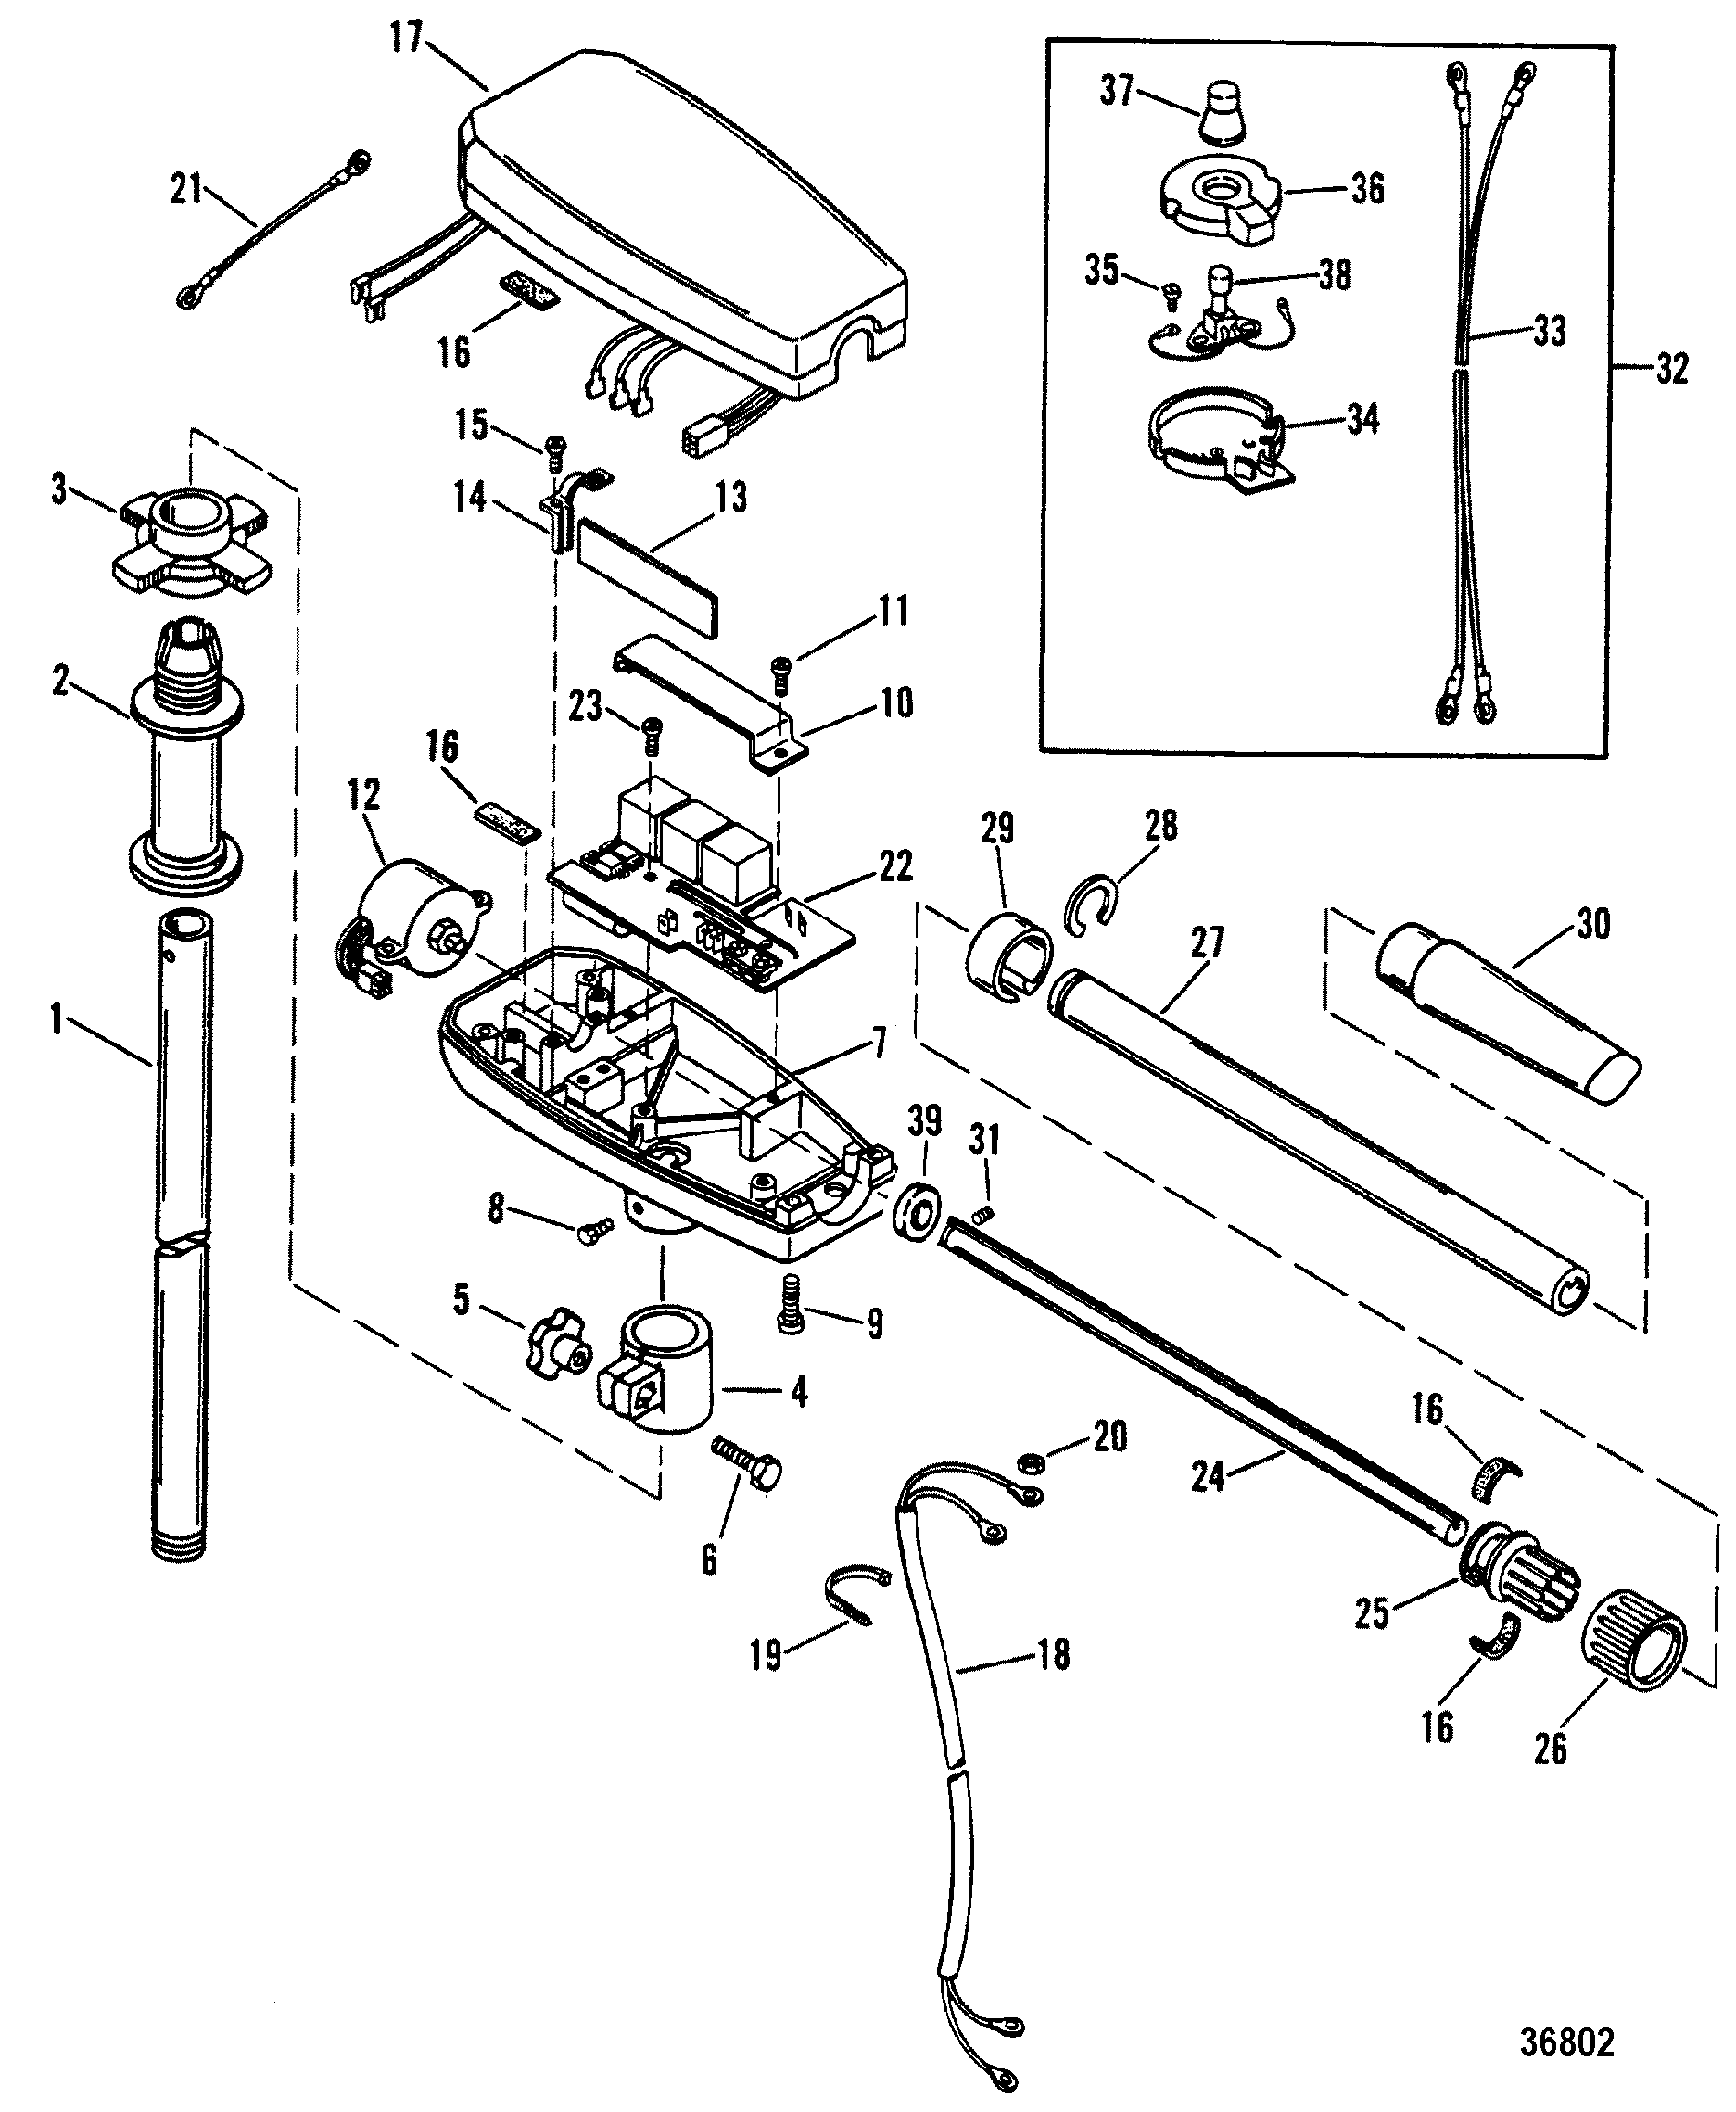 DRIVESHAFT AND CONTROL HOUSING(Transom/Deck)